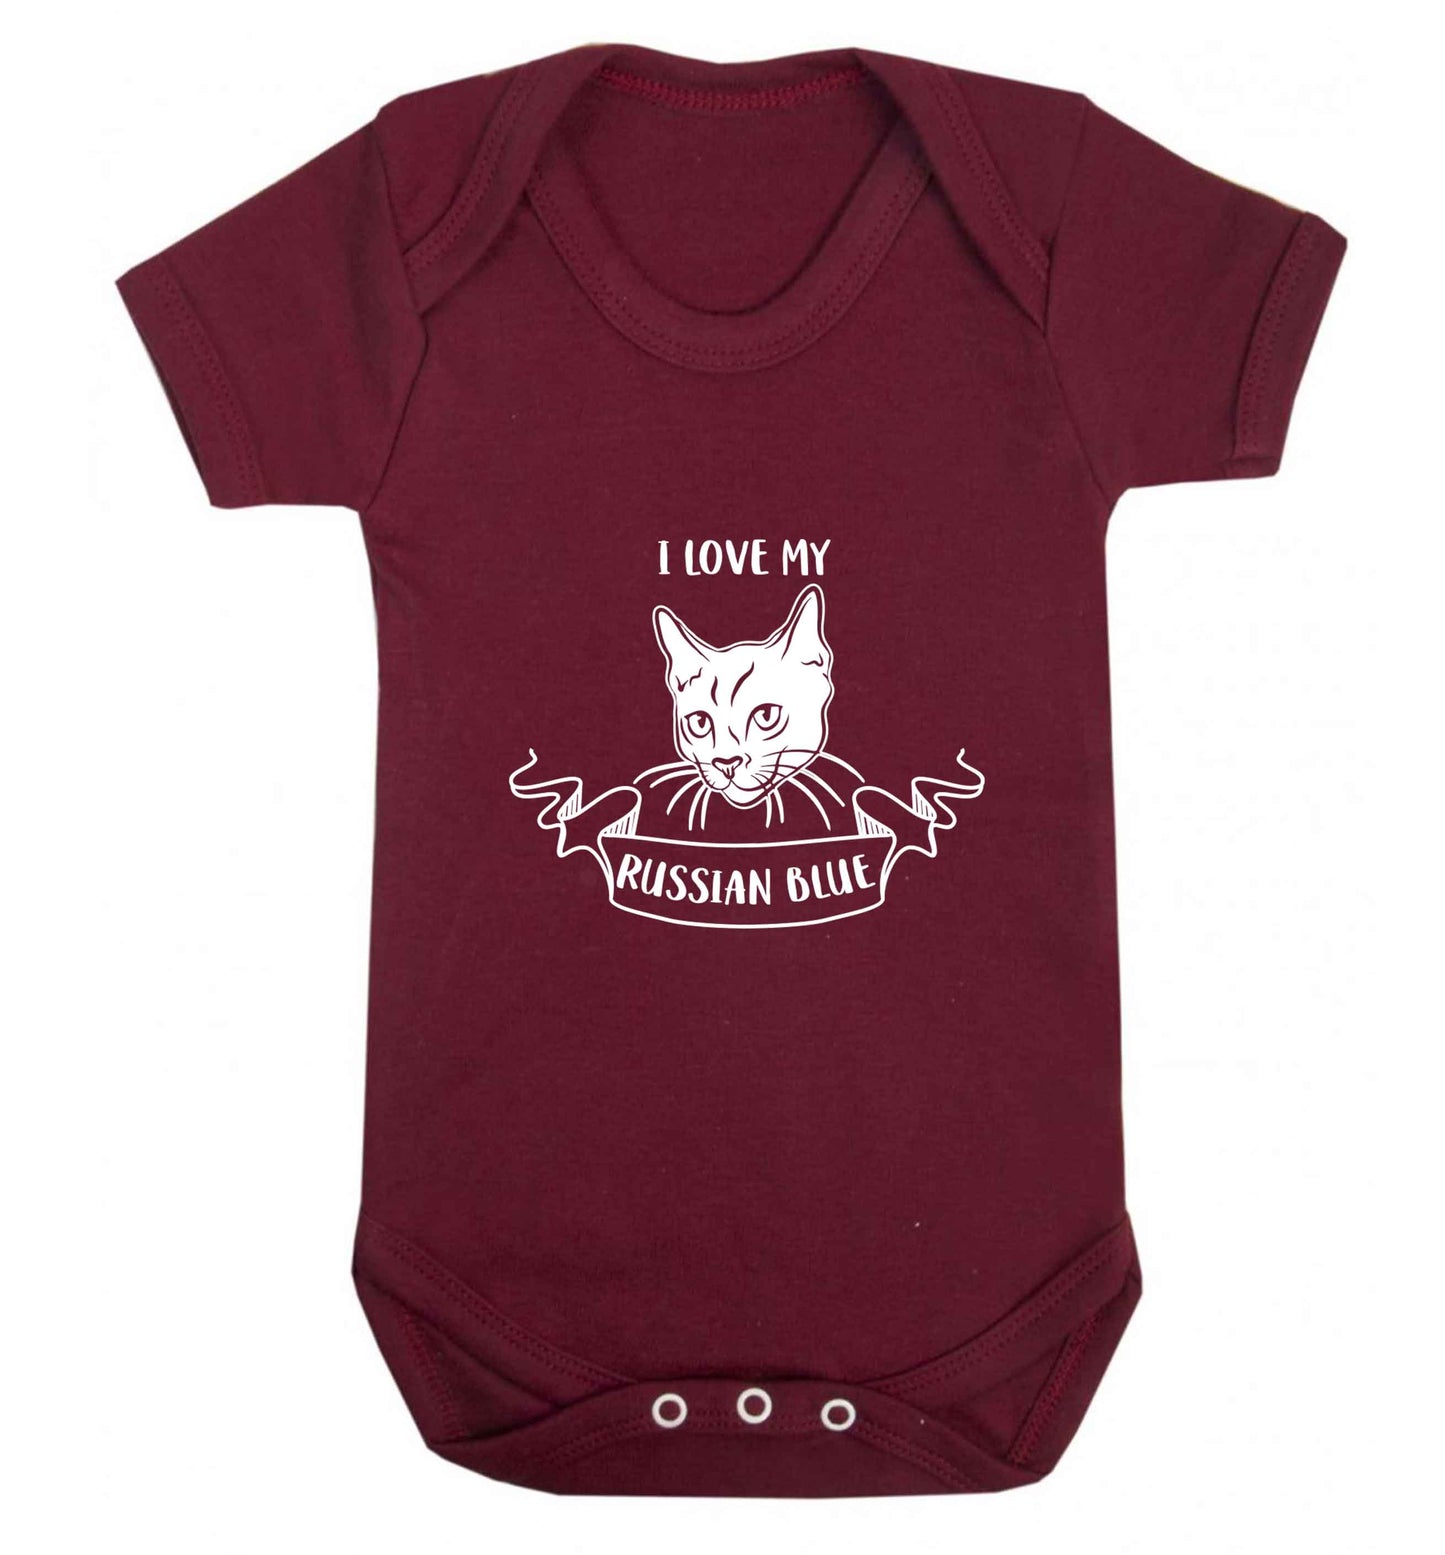 I love my russian blue baby vest maroon 18-24 months